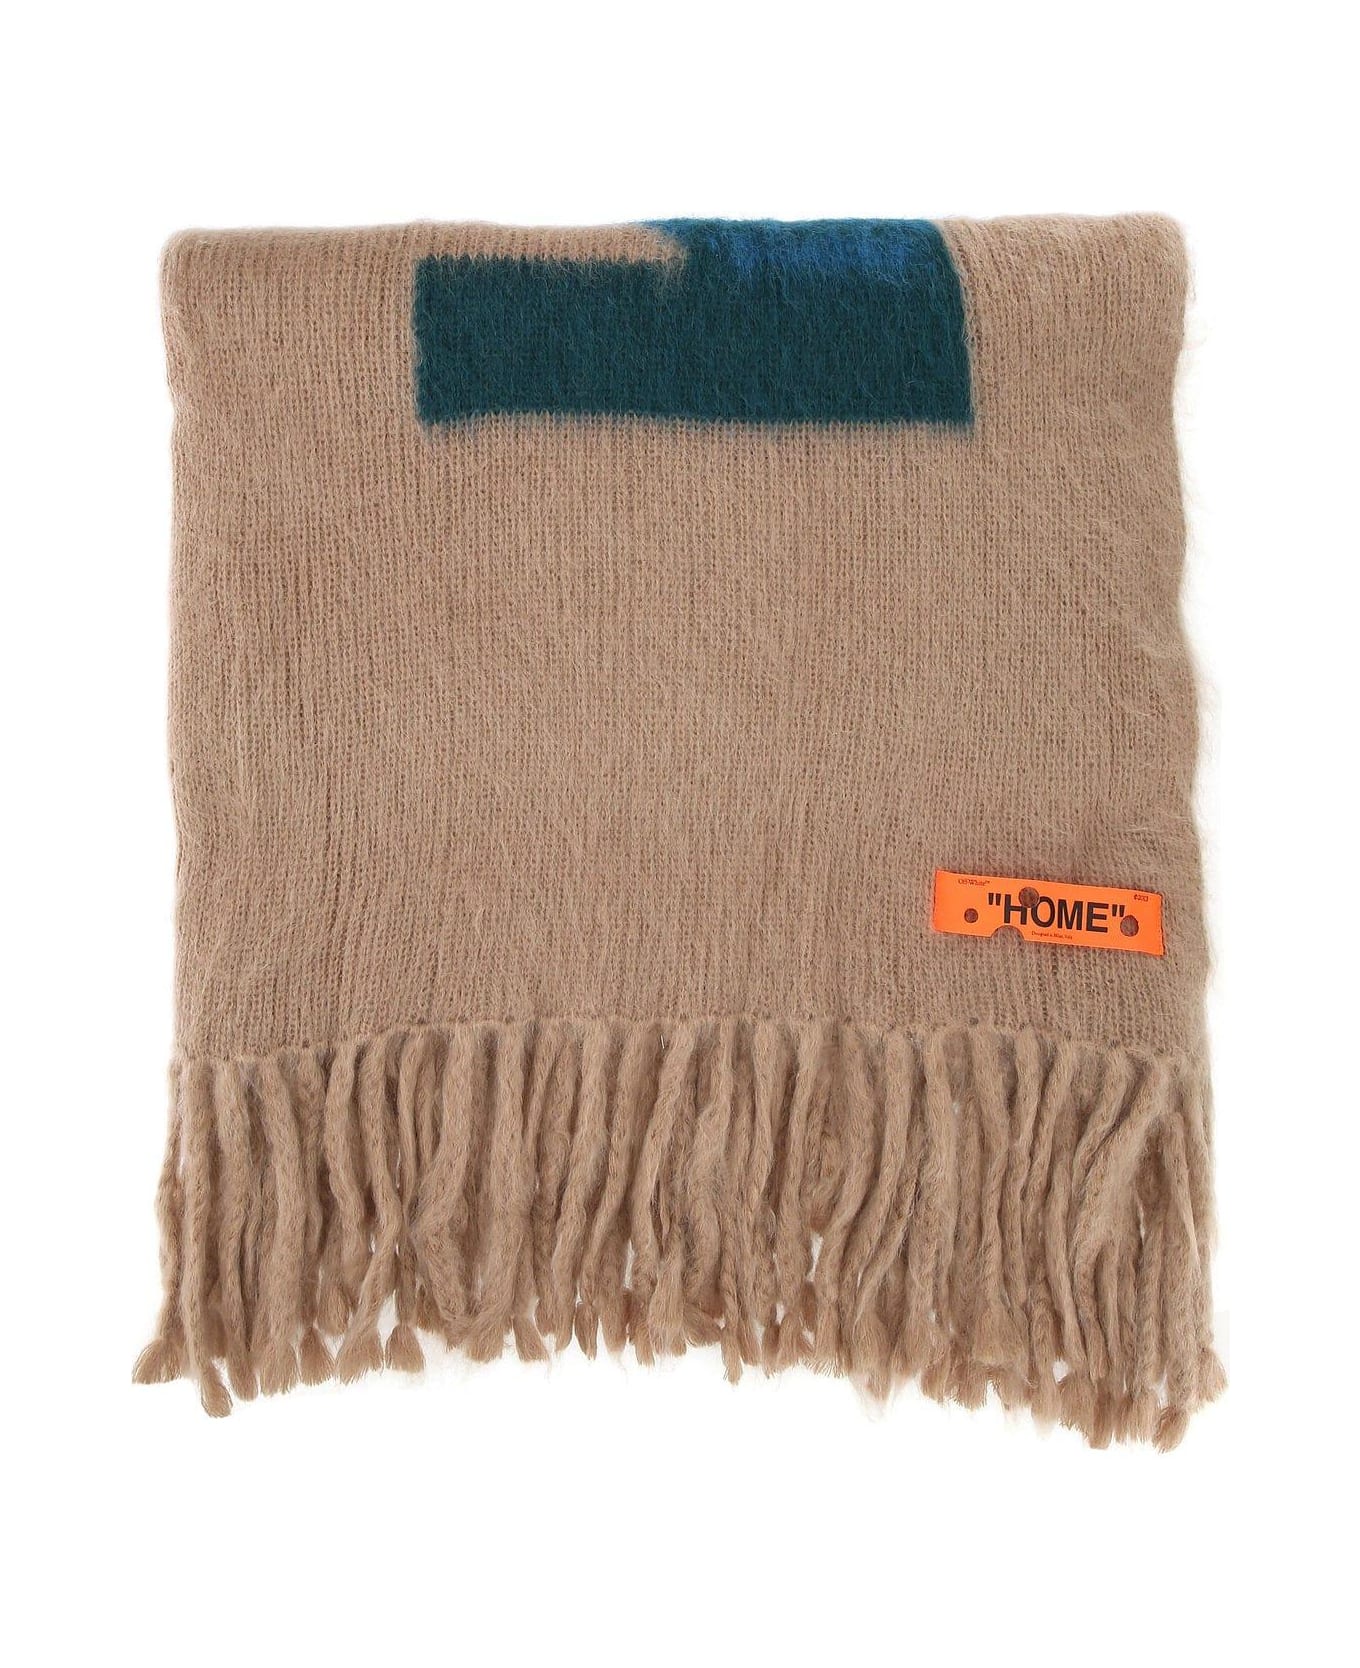 Off-White Cappuccino Mohair Blend Blanket - Camel 寝具